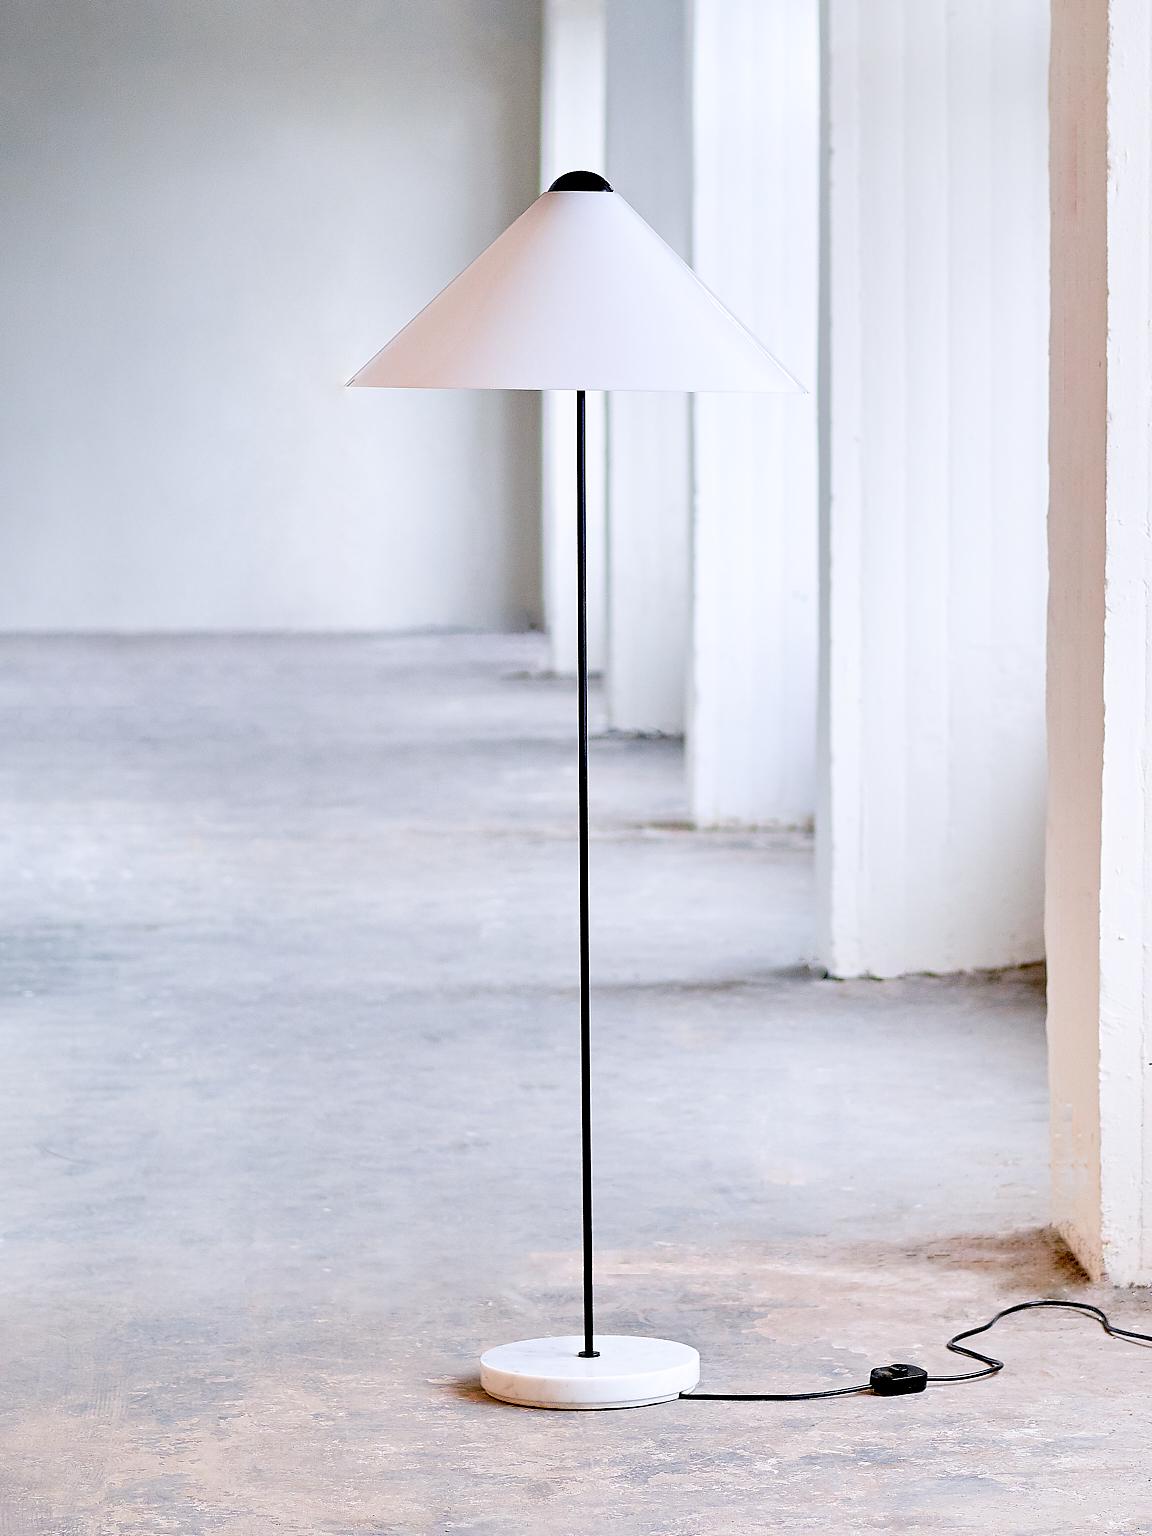 This rare floor lamp was designed by the iconic Vico Magistretti in 1973 and produced by the manufacturer O-Luce in Italy. The floor lamp is from the ‘Snow’ series and was only in production for a short period. The lamp has a semi transparent white